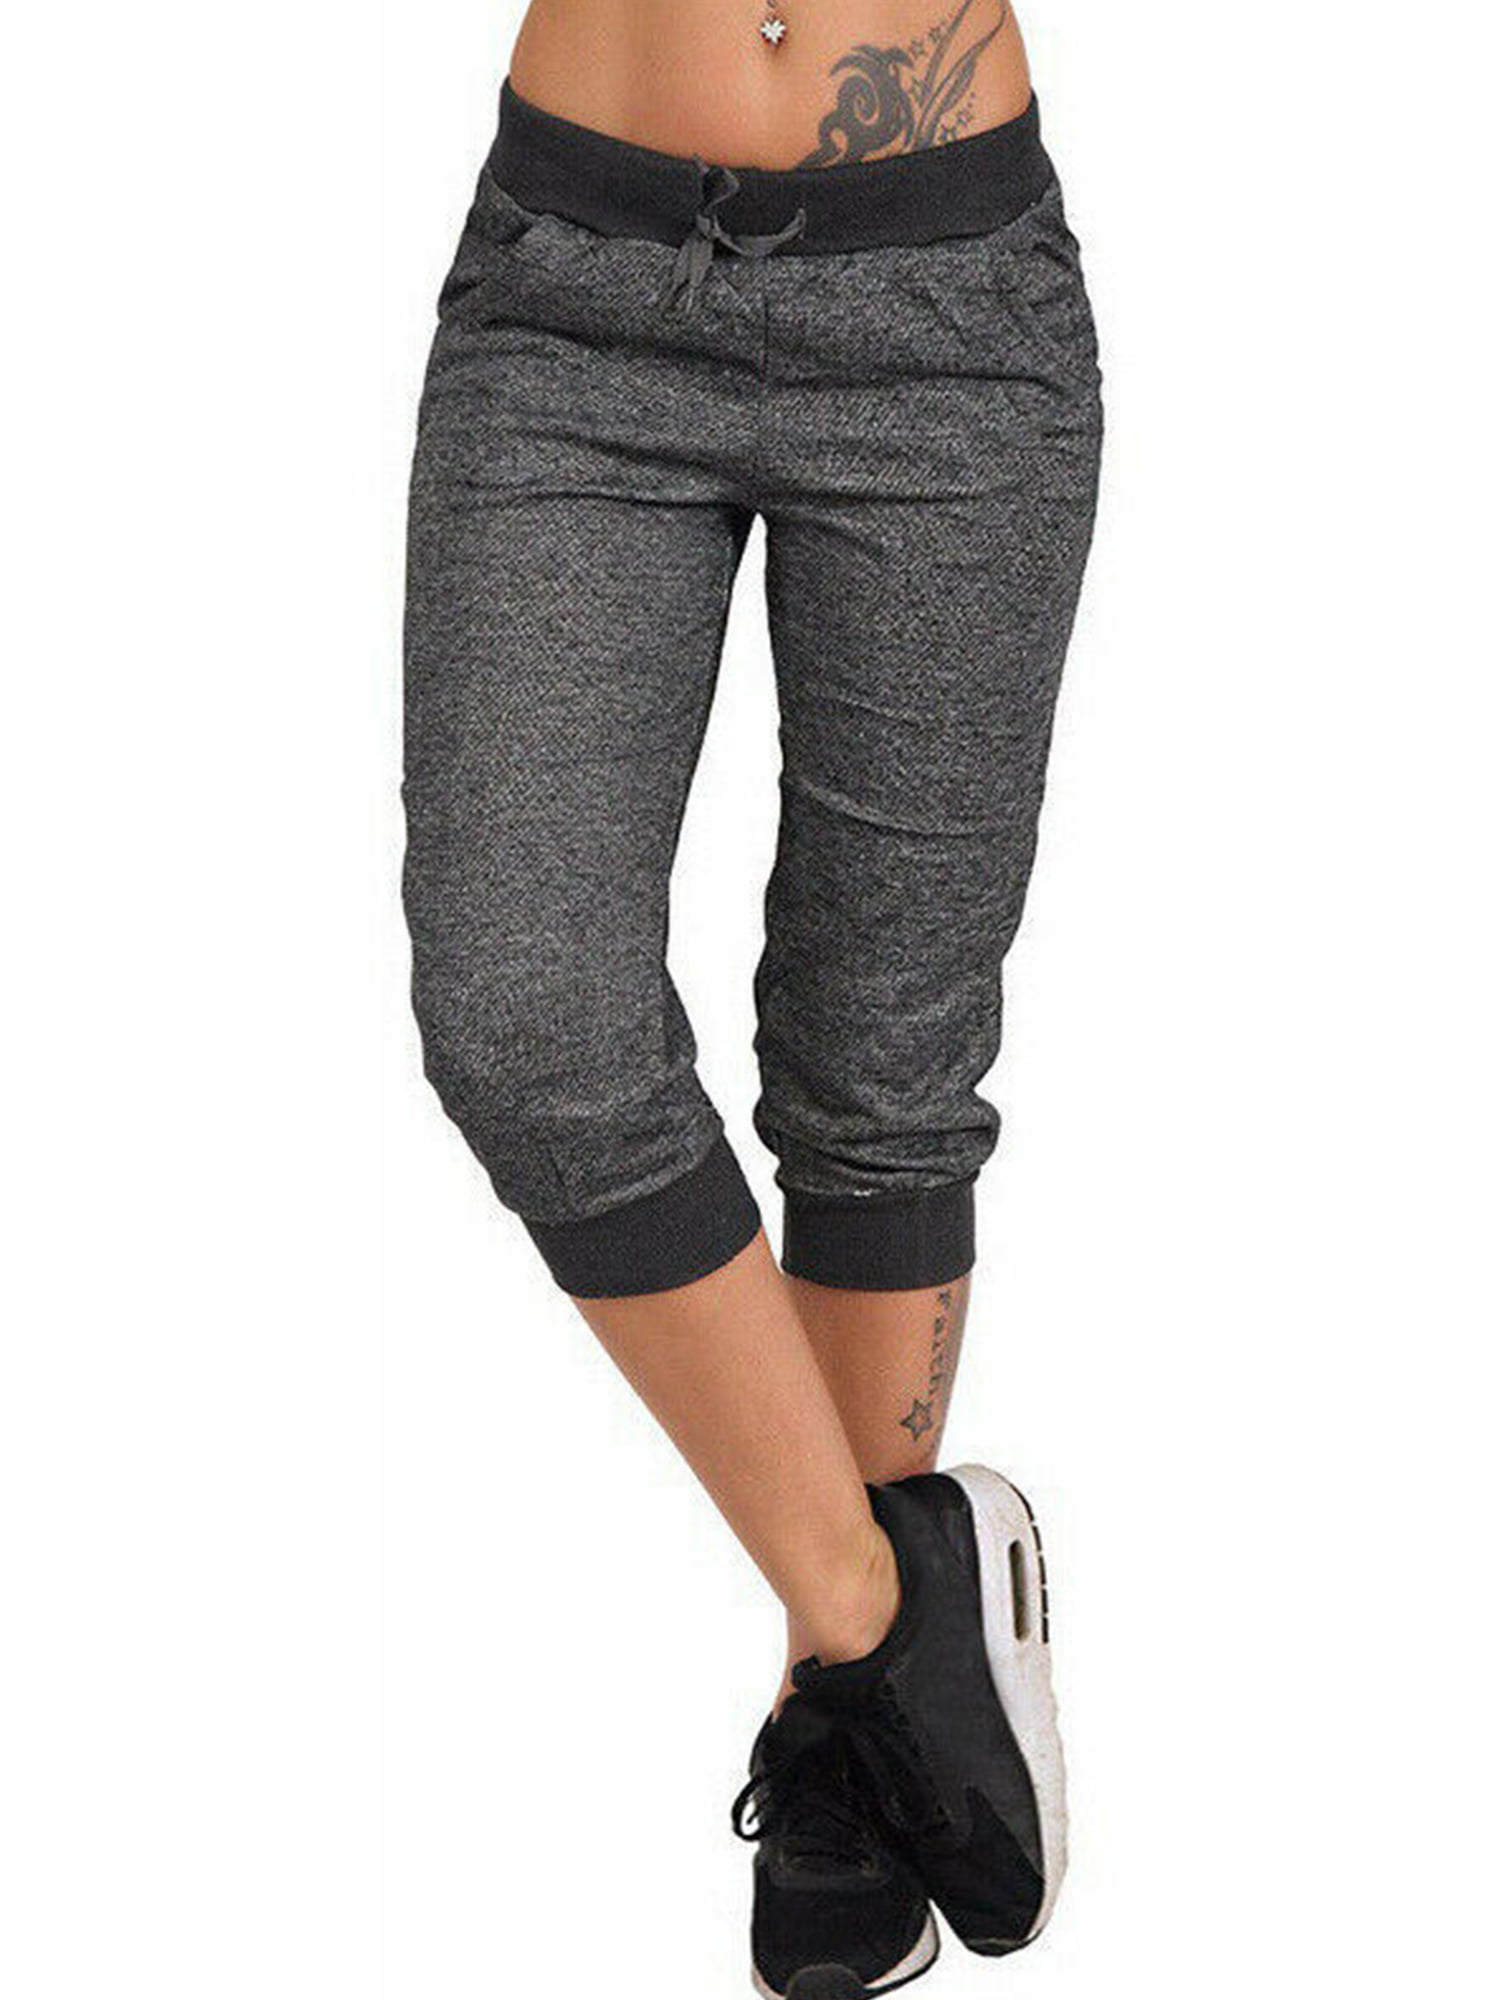 Details about   Womens Sports Fitness Yoga Jogging Capri Leggings Gym 3/4 Pants Cropped Trousers 